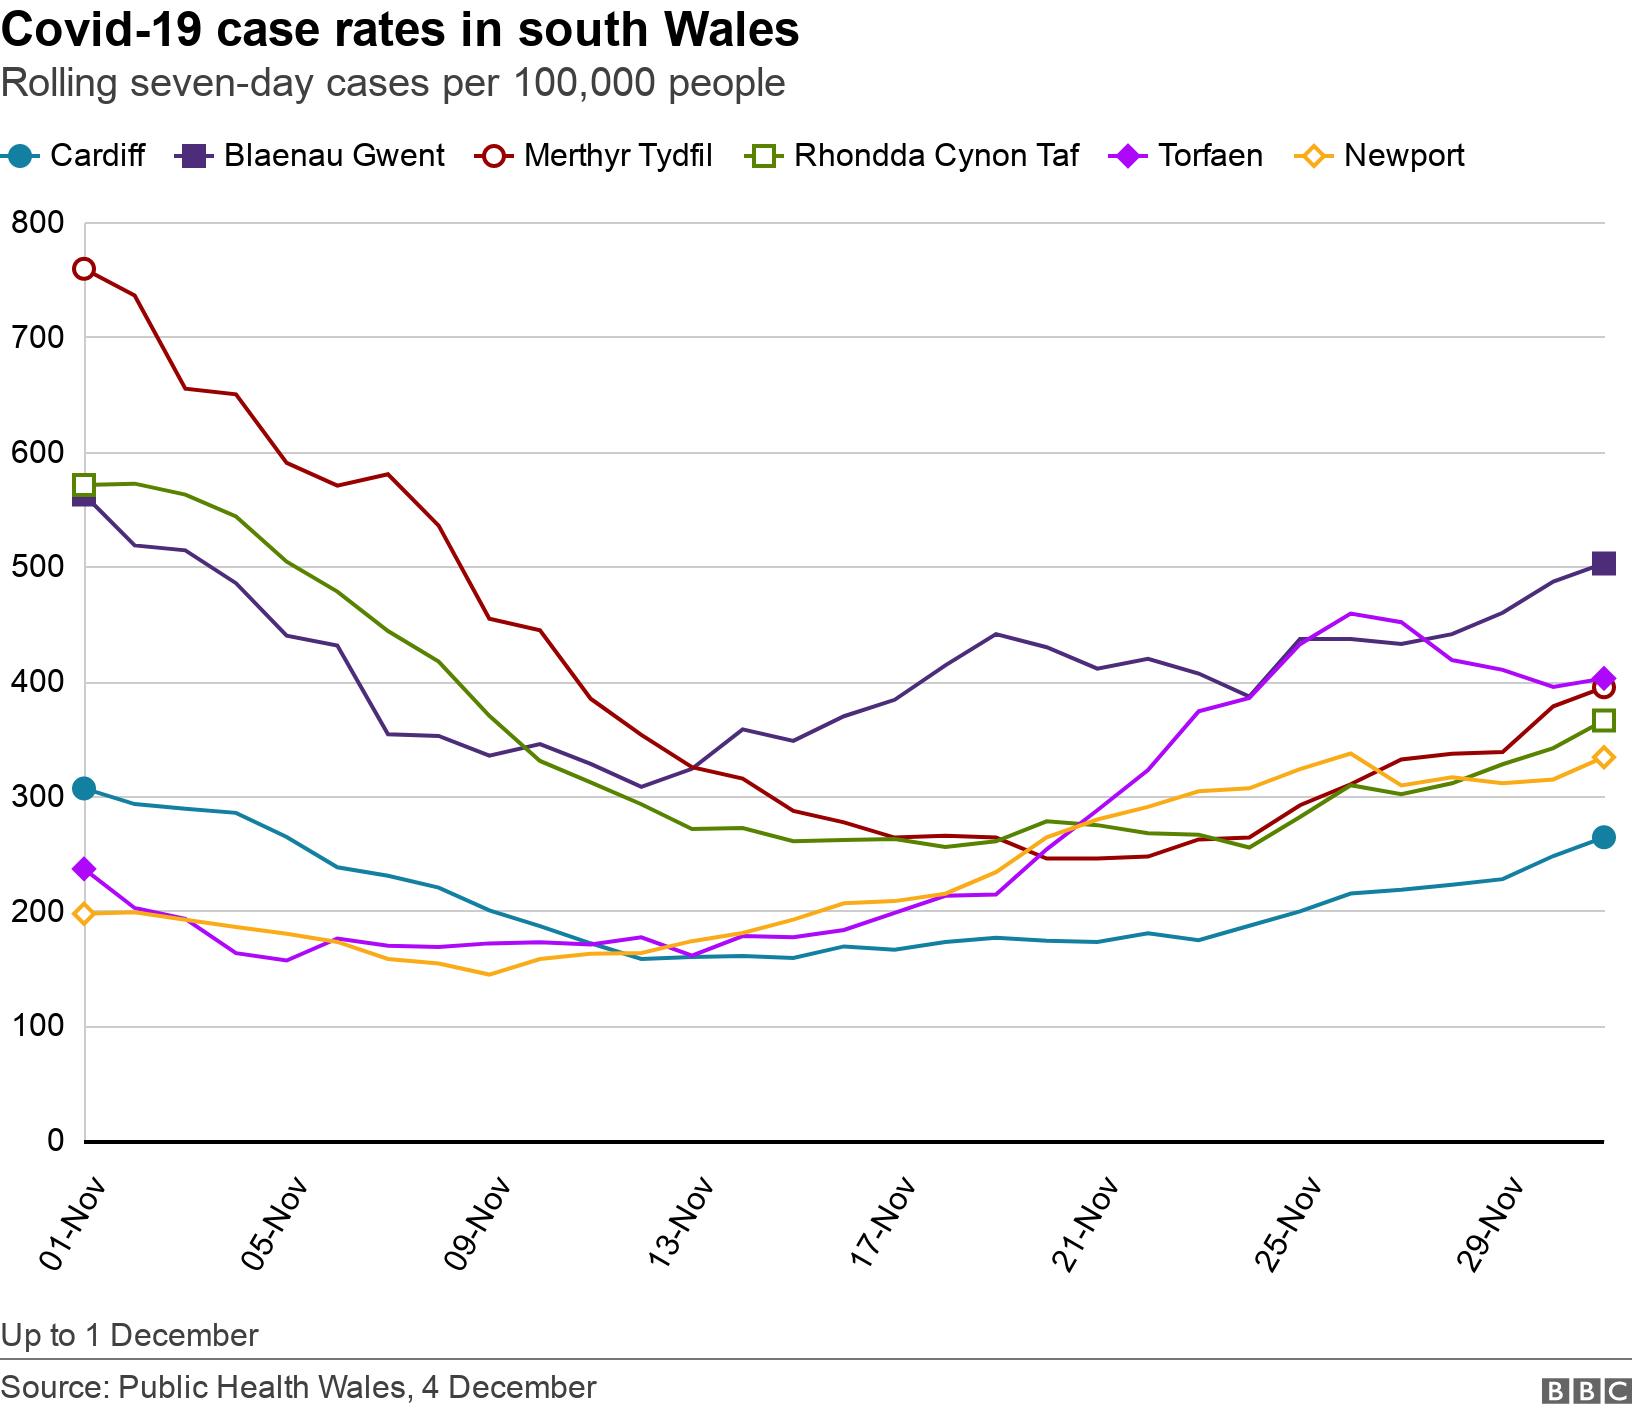 Covid-19 case rates in south Wales. Rolling seven-day cases per 100,000 people. Up to 1 December.